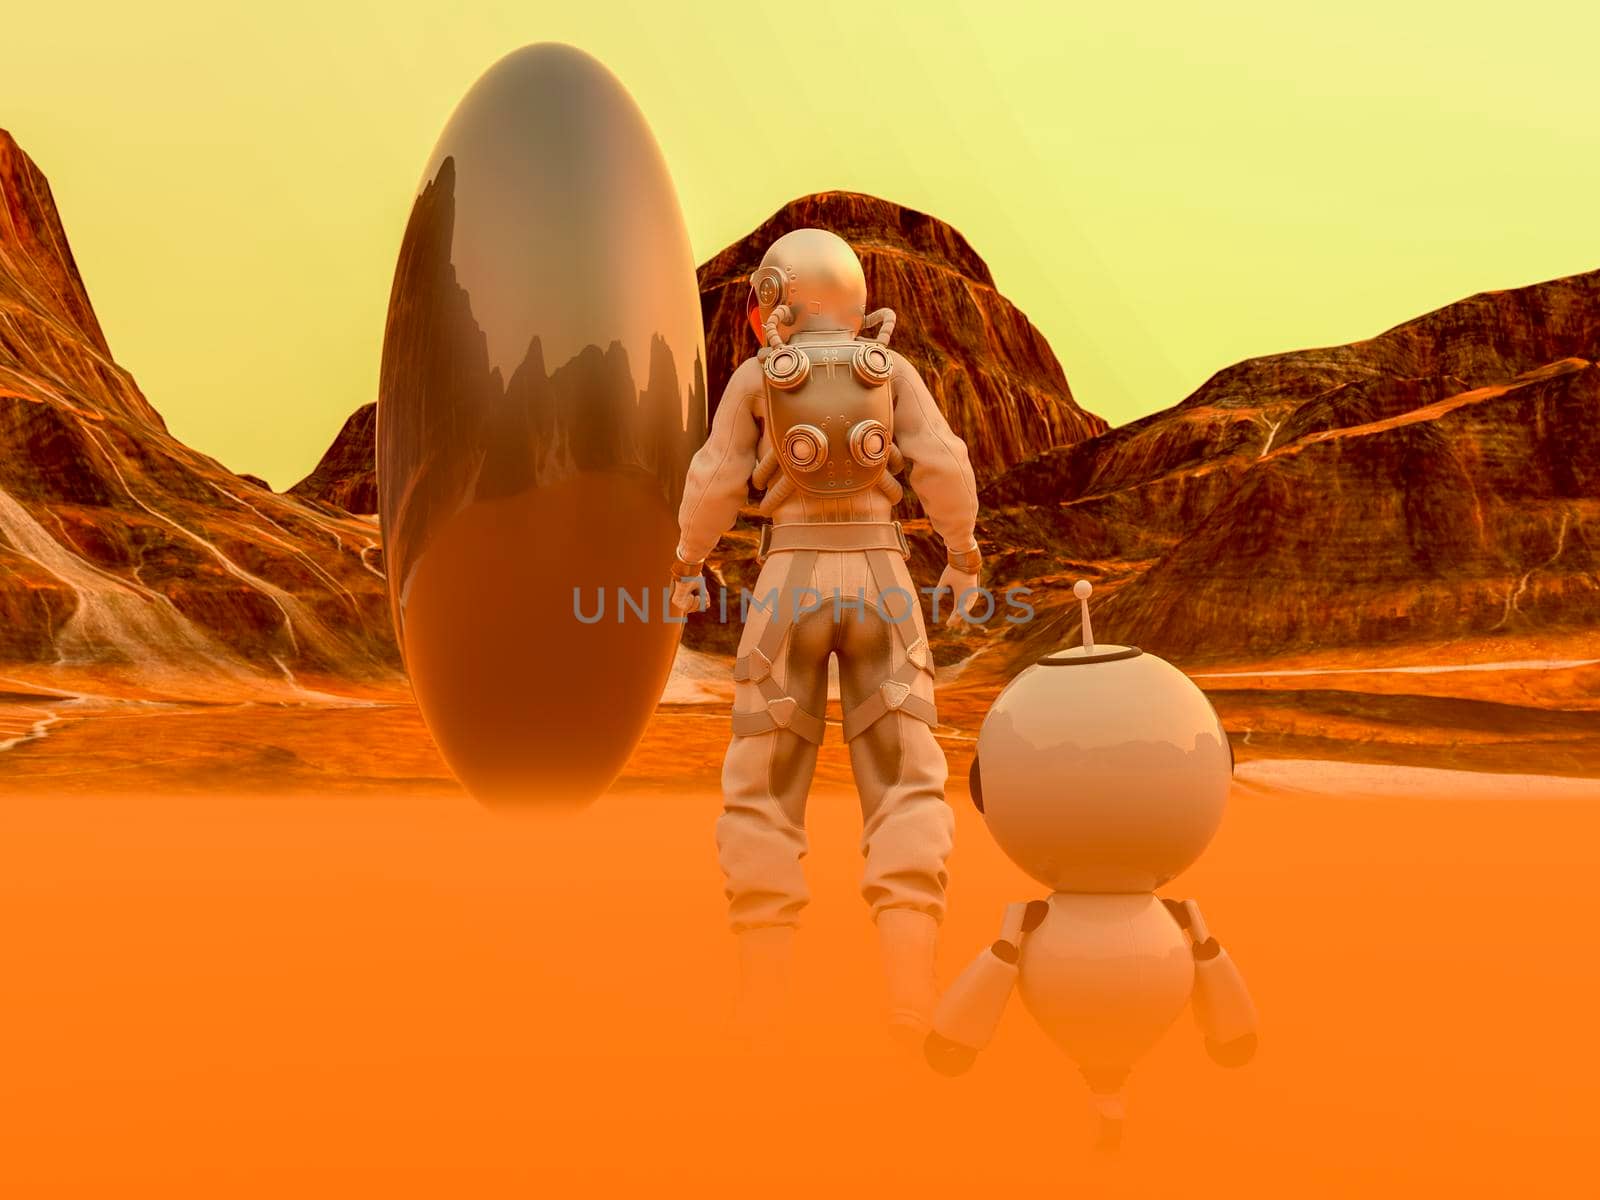 Astronaut and small robot facing a strange egg-shaped object at the spacewalk on a desert planet by ankarb